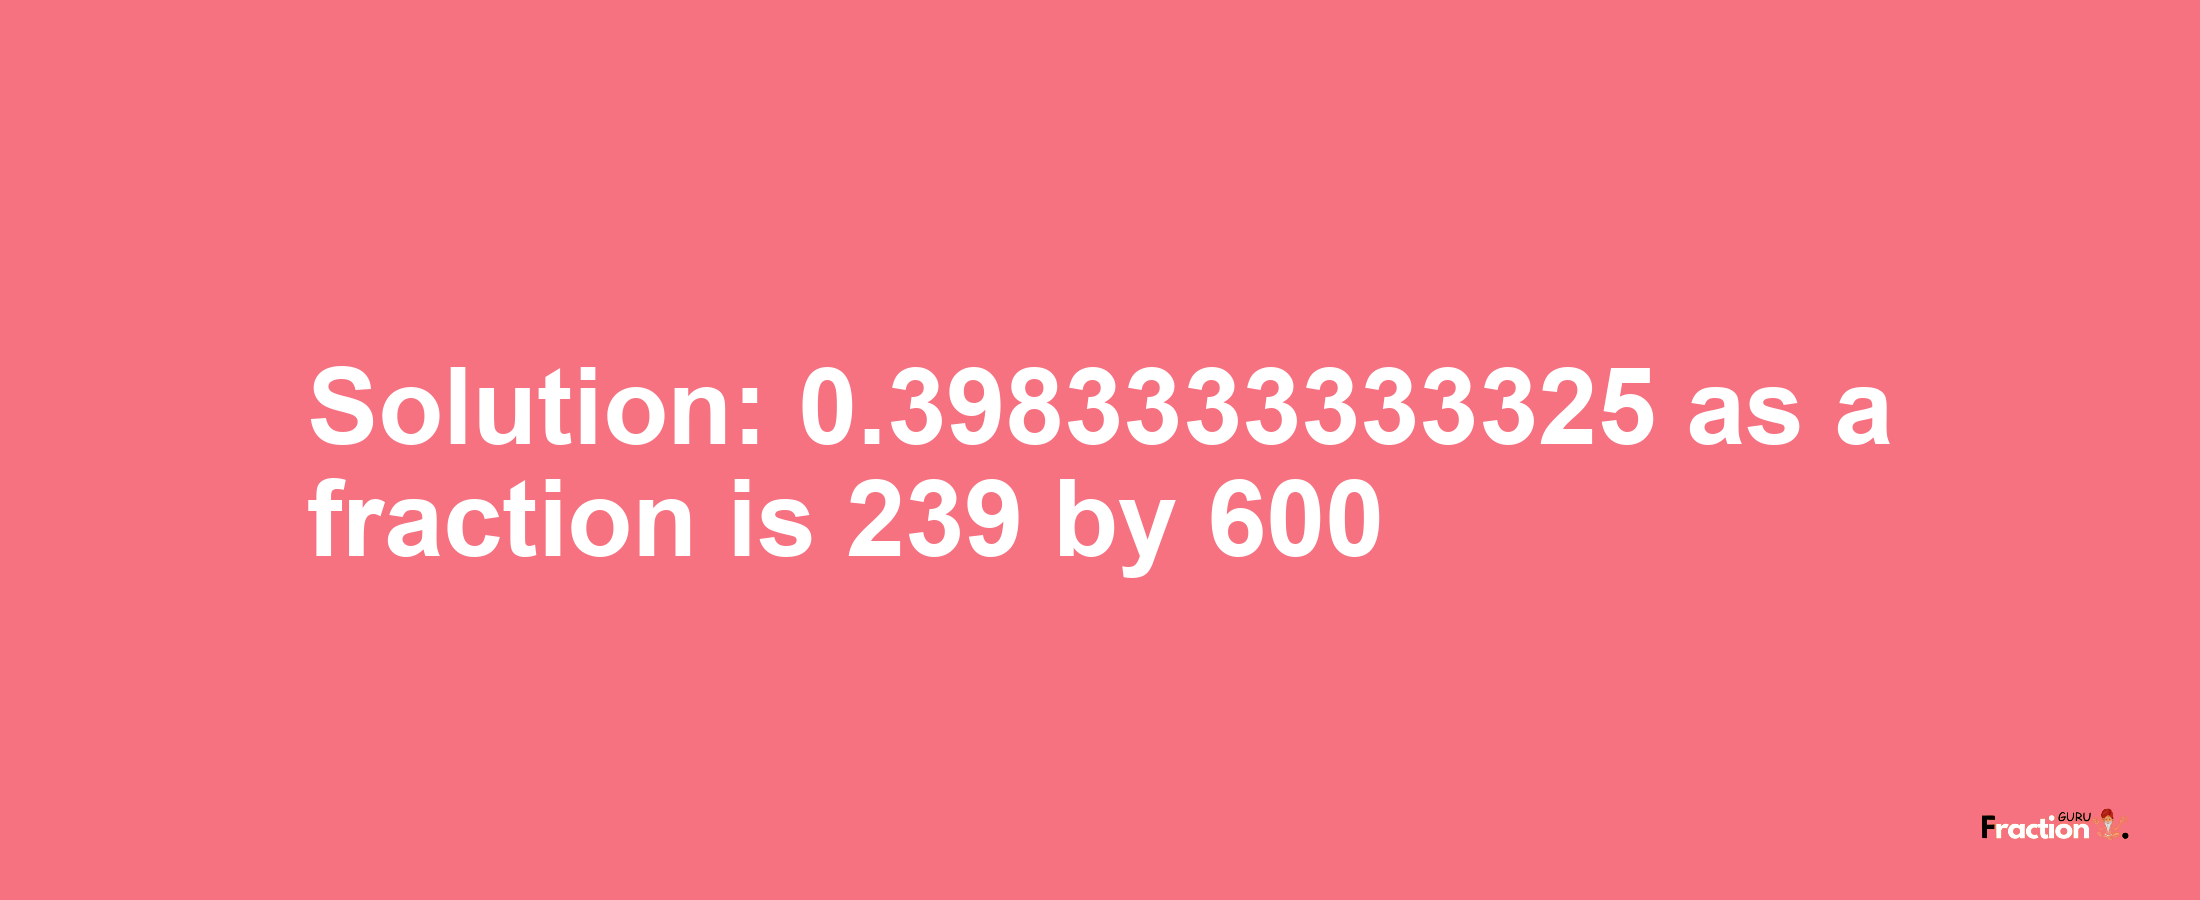 Solution:0.3983333333325 as a fraction is 239/600